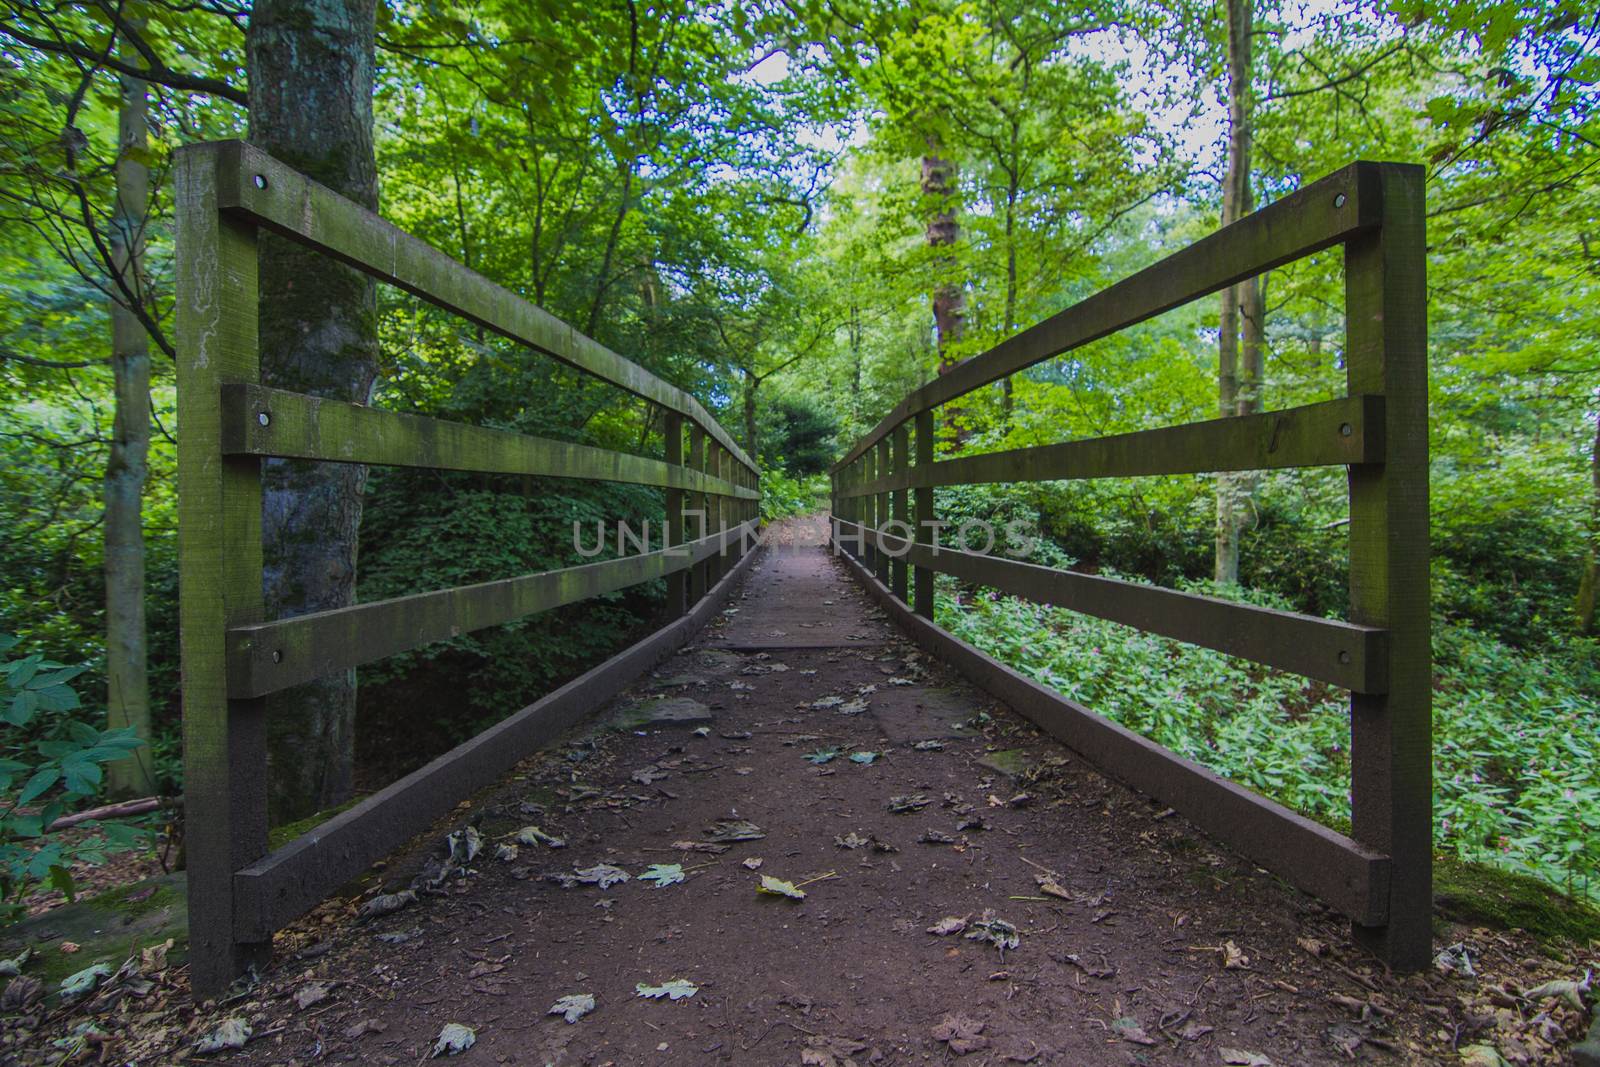 A Wooden Bridge in the Woods by samULvisuals